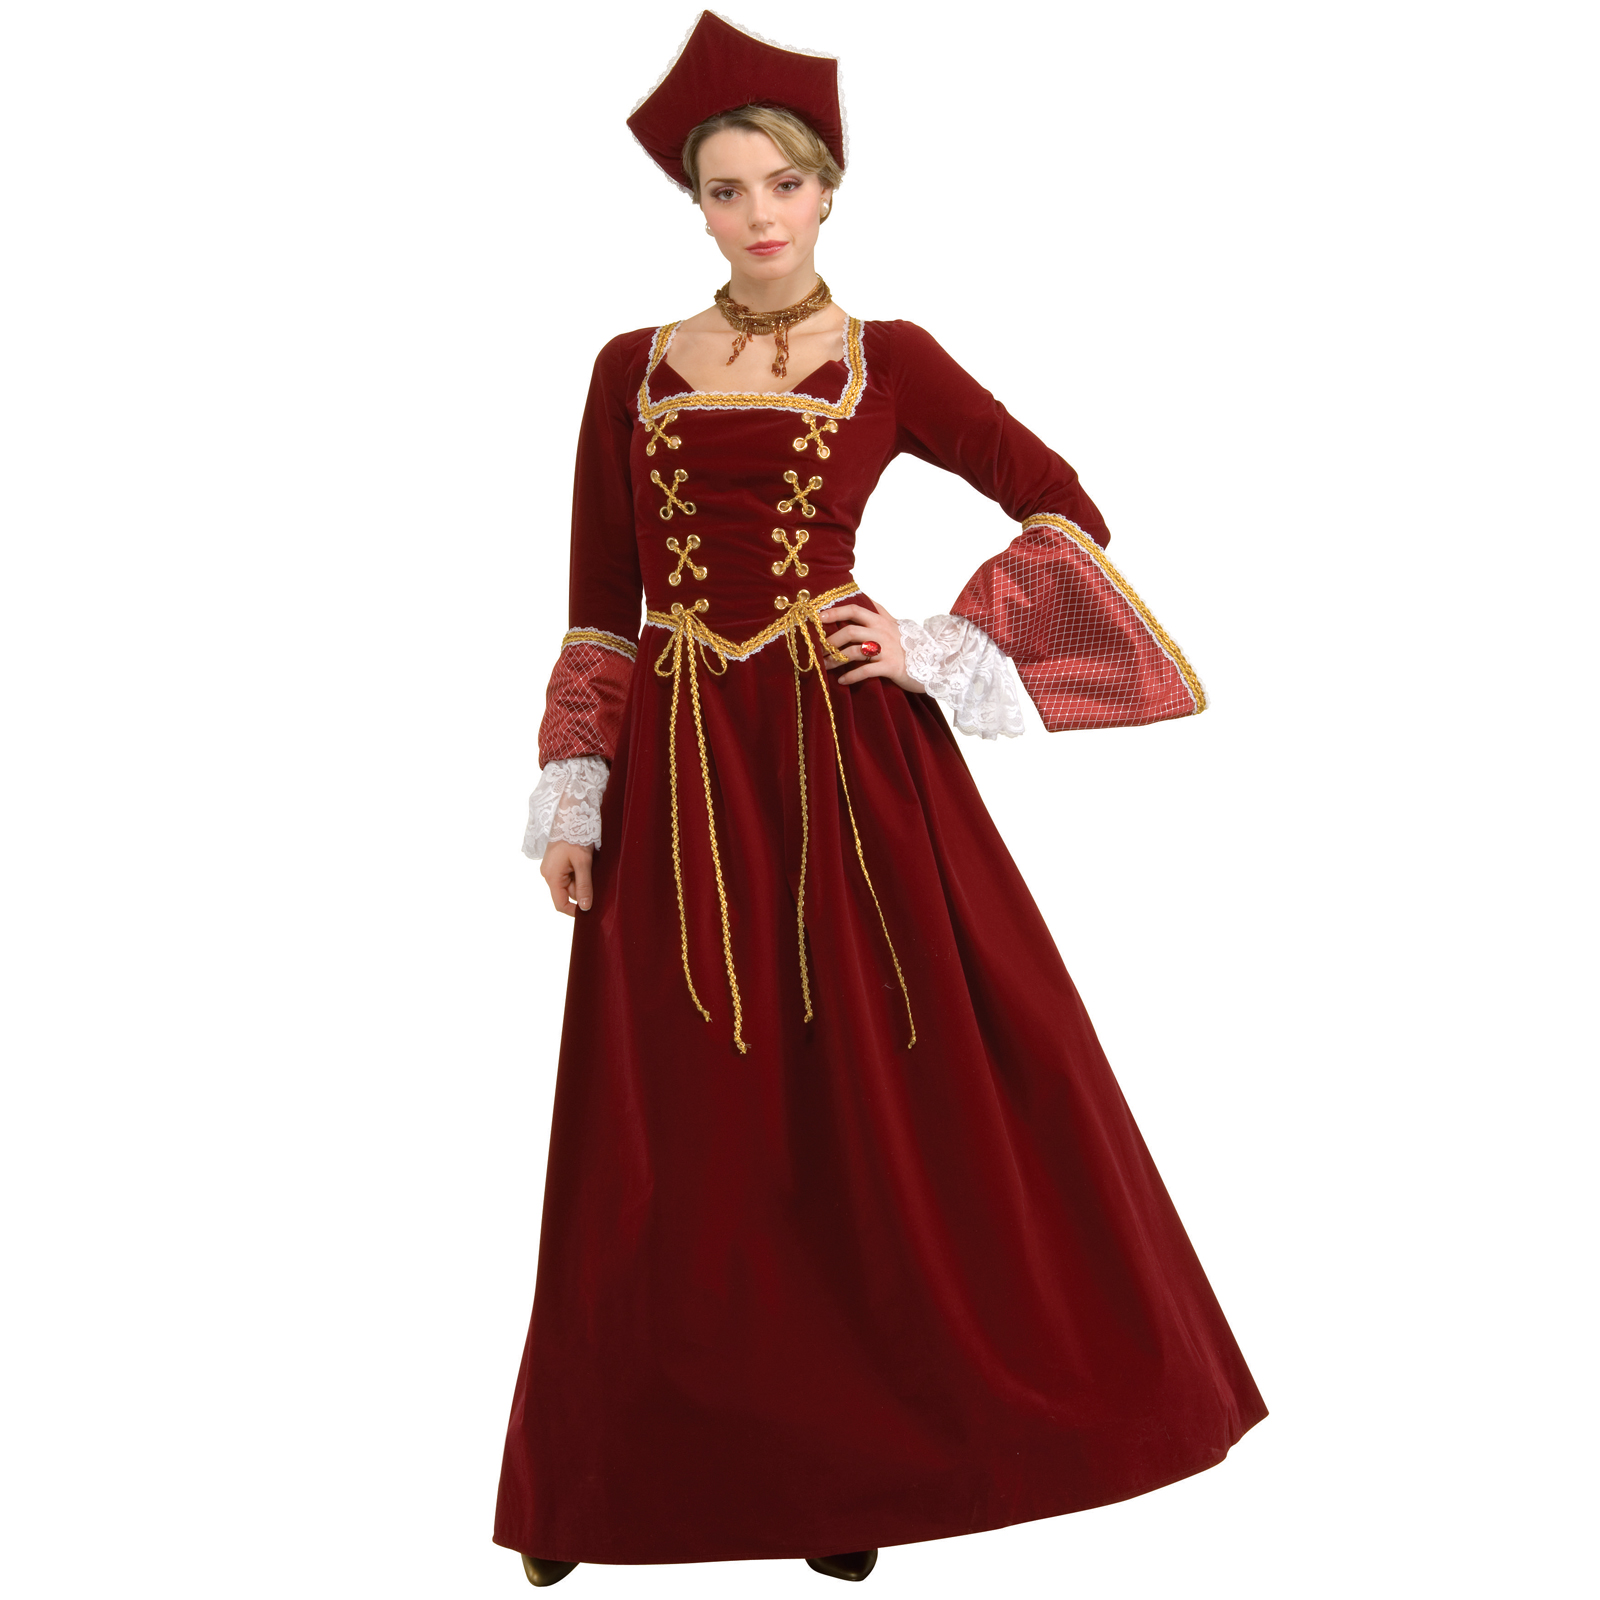 Rubie's Costume Co Women's Faire Maiden Grand Heritage Collection Adult Costume - Large